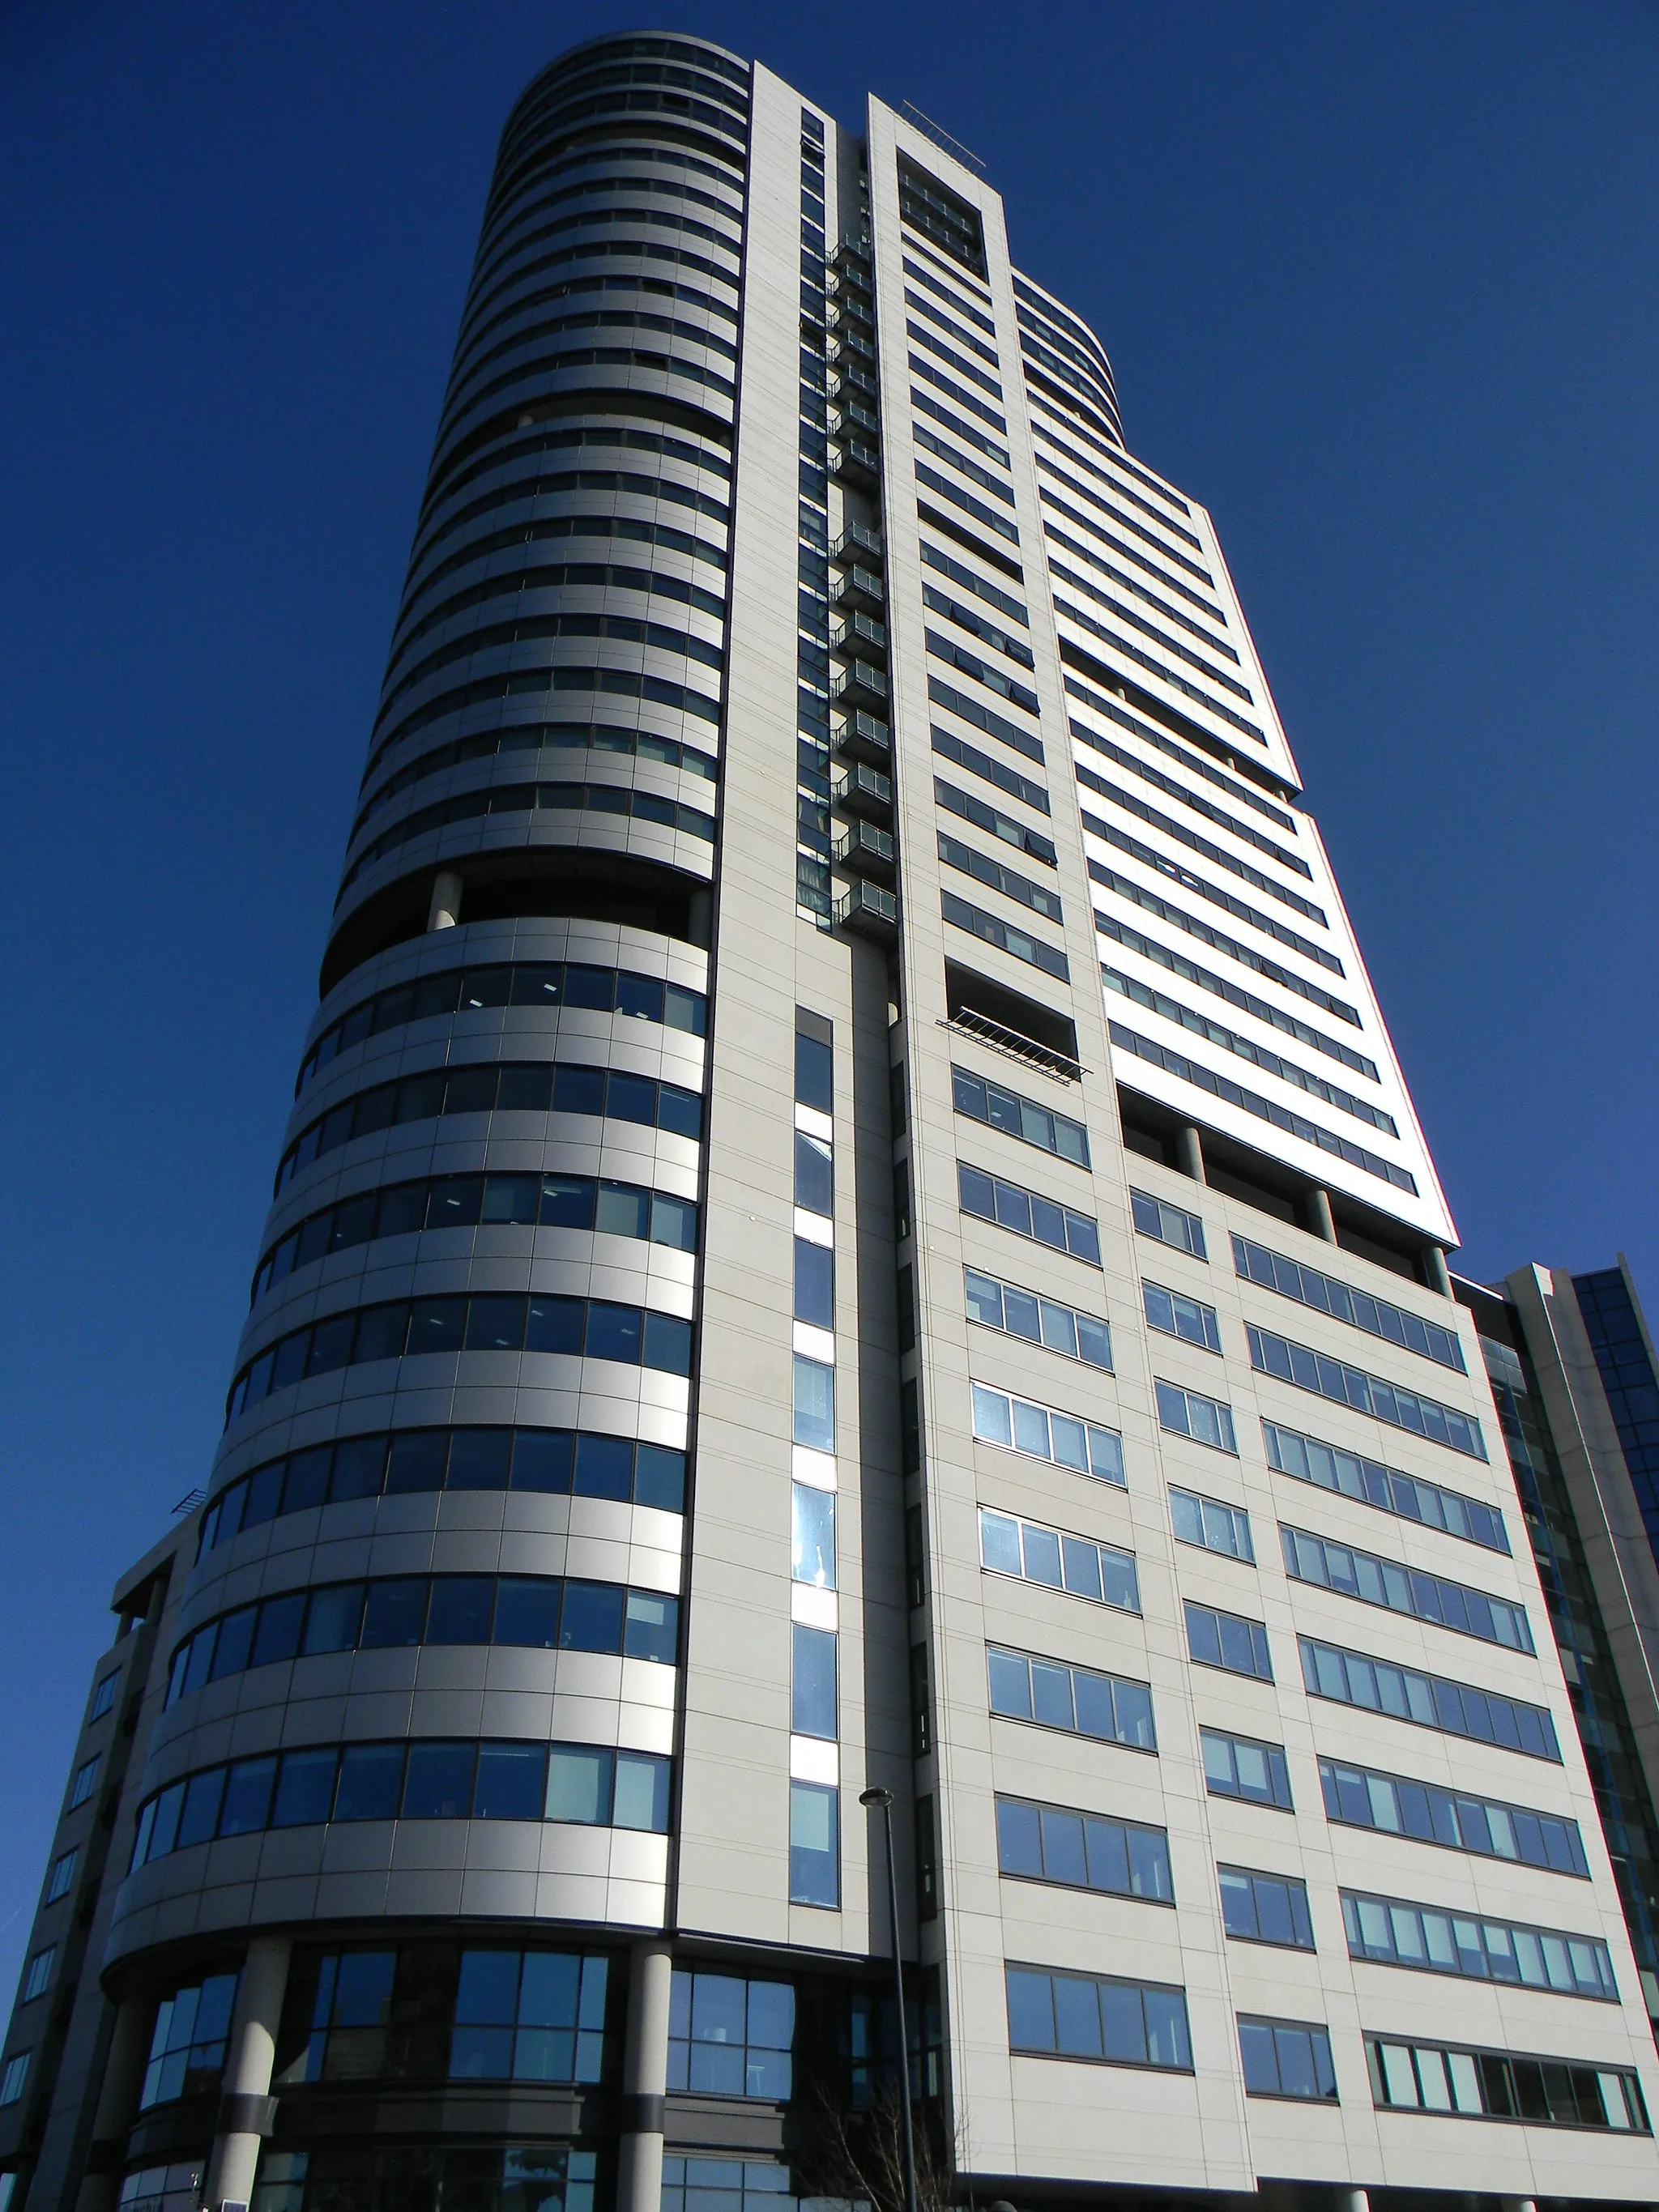 Photo showing: Bridgewater place, Leeds, West Yorkshire, England. 
Leeds and Yorkshire's tallest building.